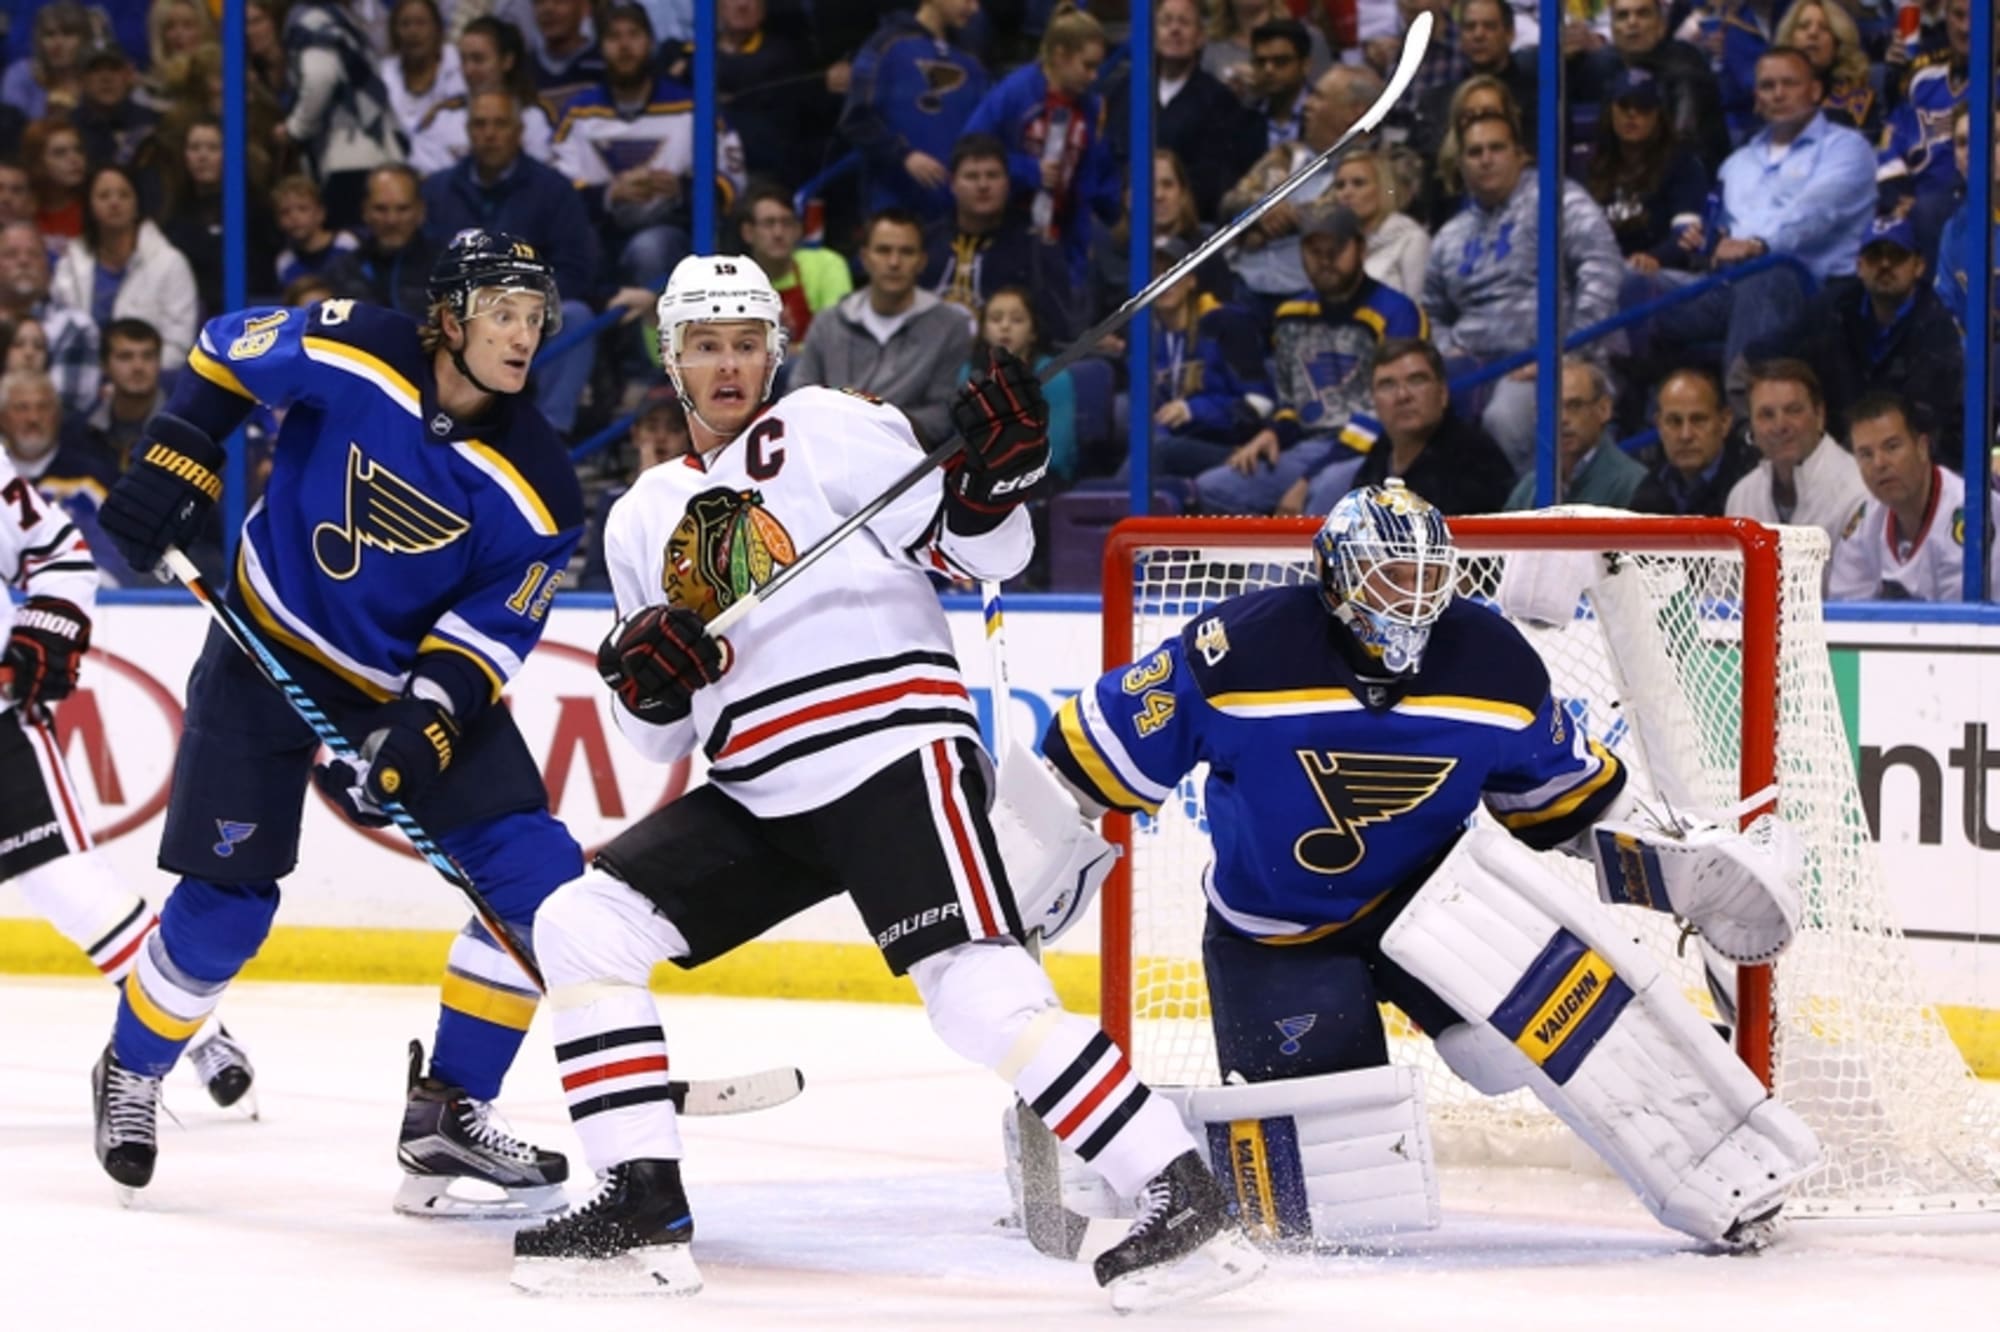 St. Louis Blues: Jake Allen Outdueled By Corey Crawford